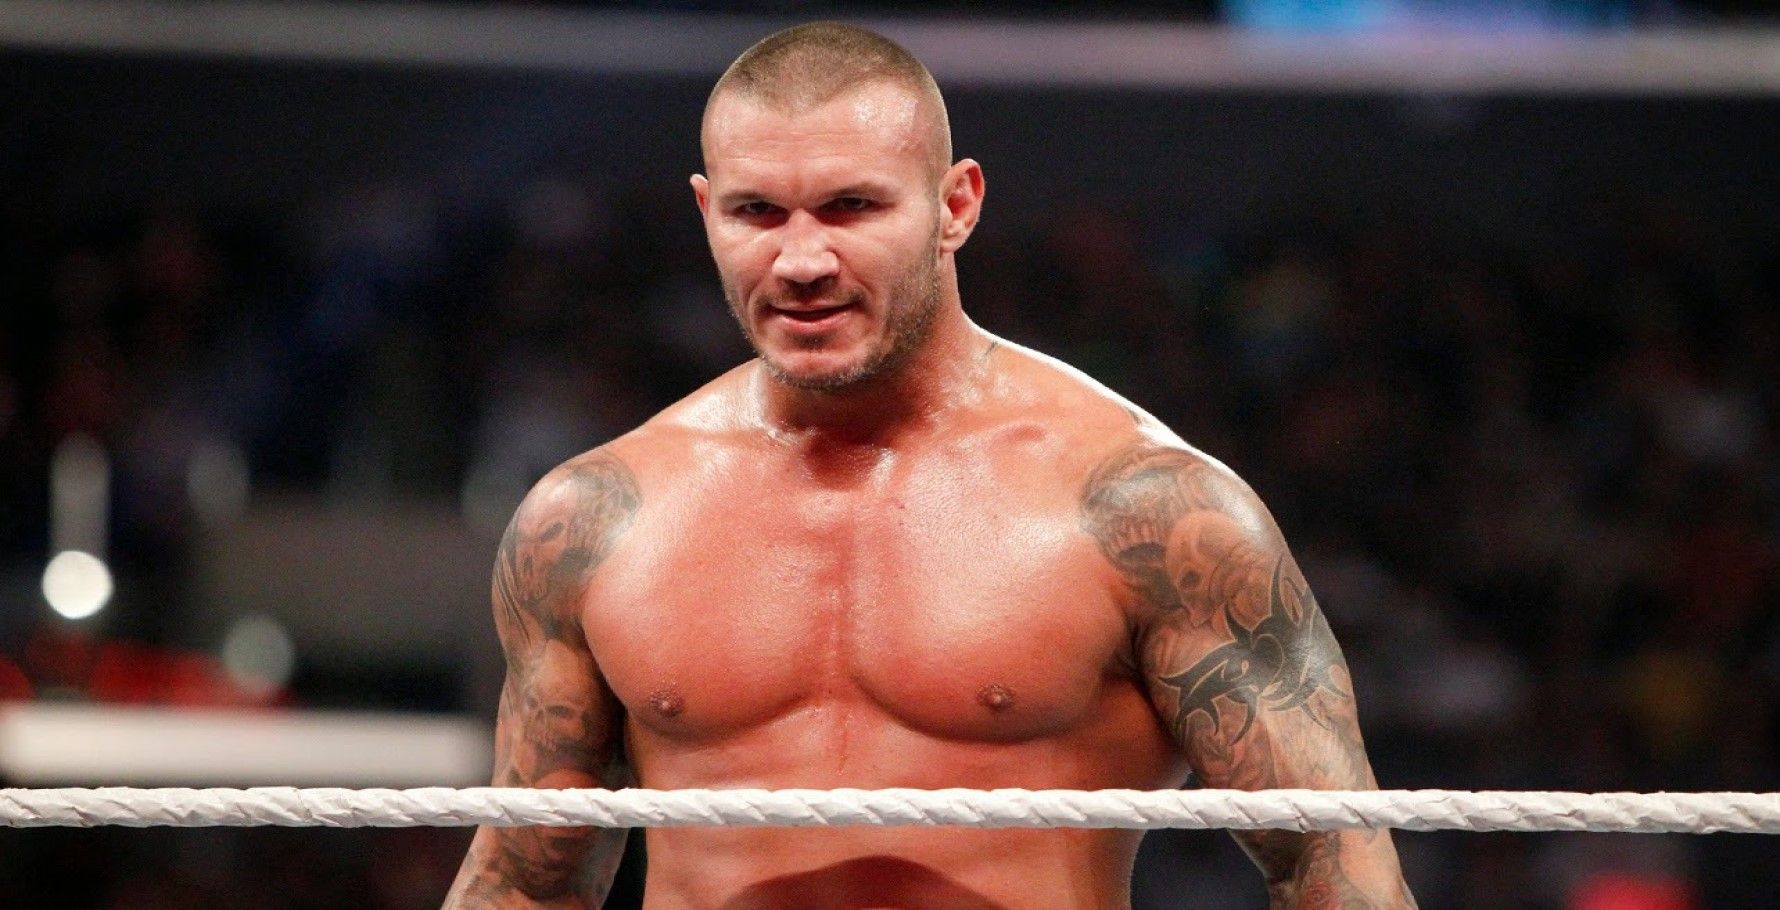 The Legend Killer 10 WWE Hall Of Famers Randy Orton Attacked